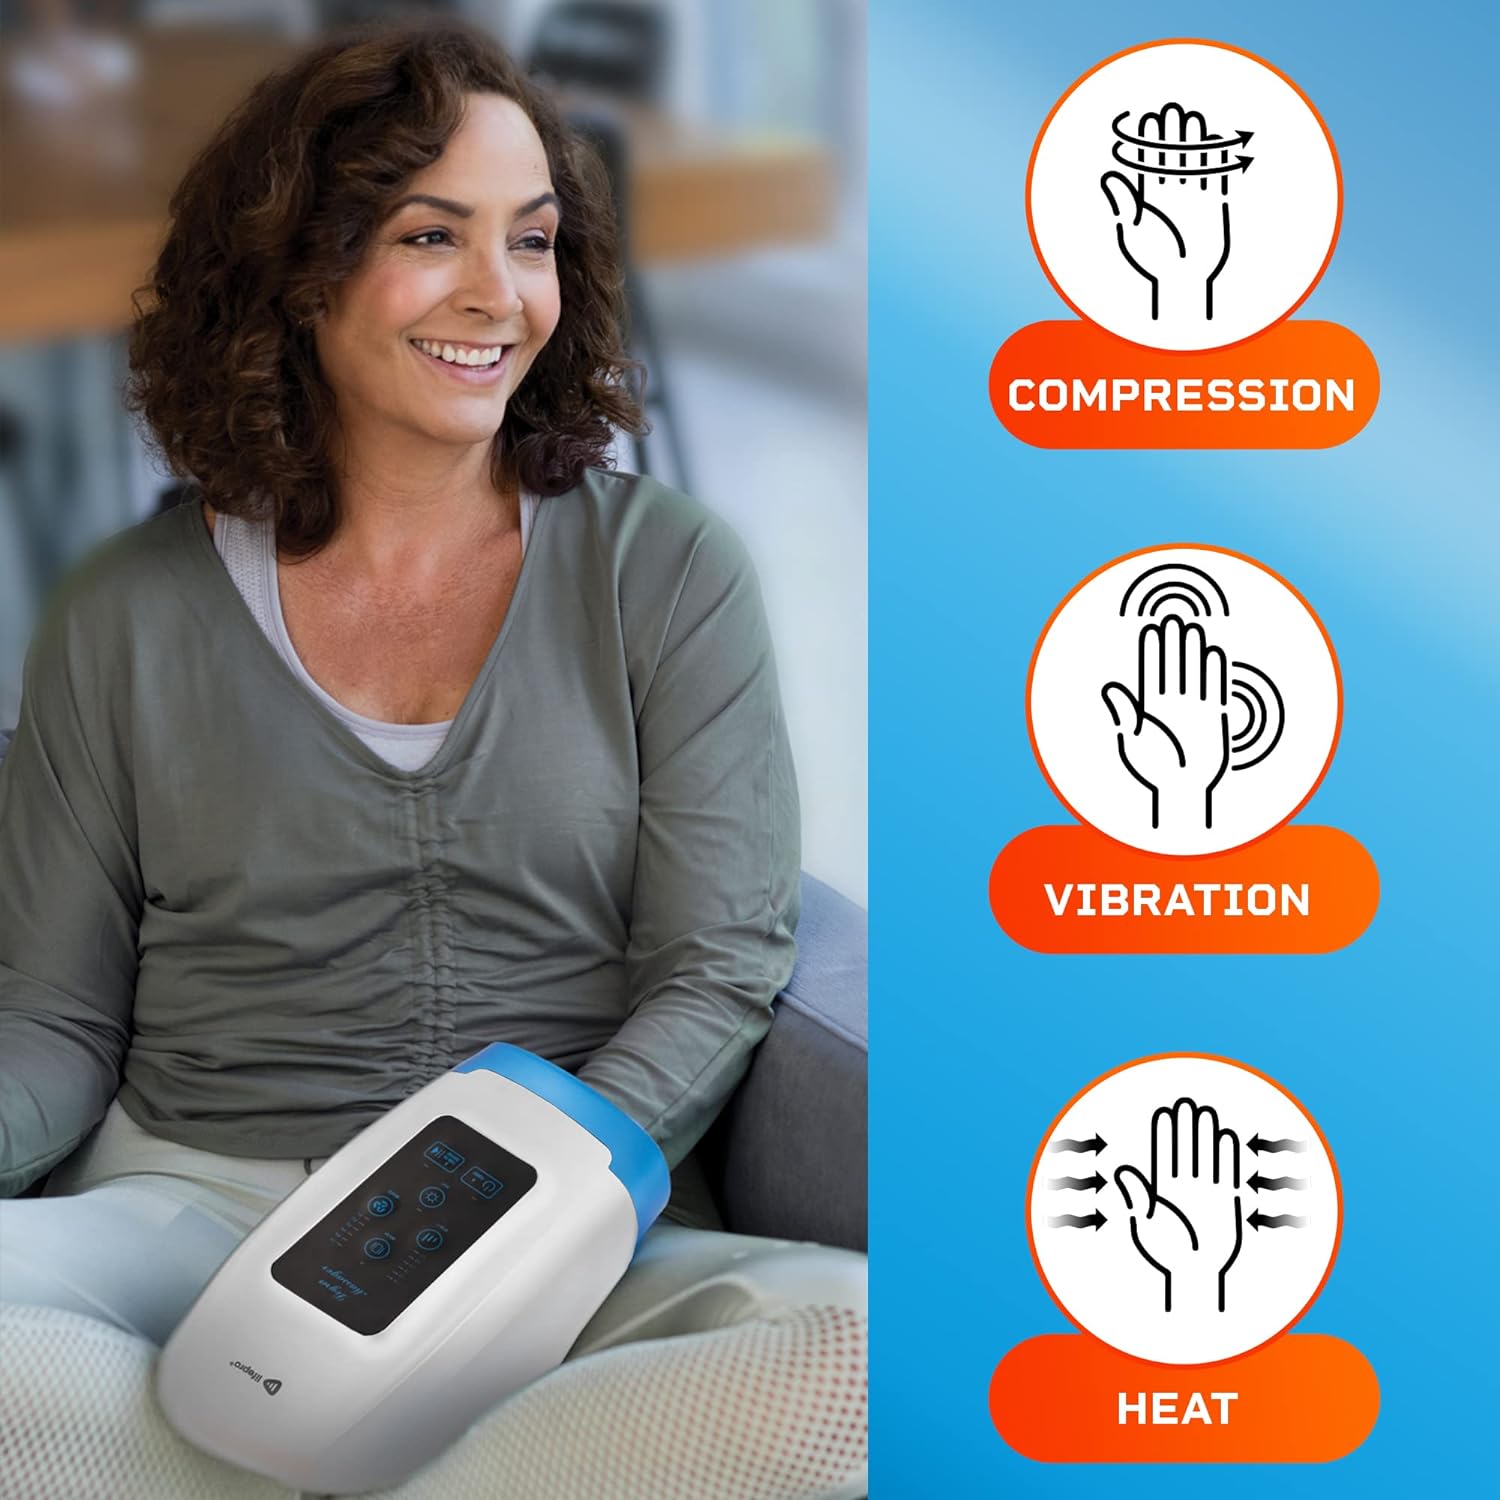 Legra Plus Hand Massager White - Personal Electric Massager for Wrist, Hand, Palm, Finger Pain Relief, Arthritis, Carpal Tunnel, Numbness - Vibration & Heat Therapy Massager